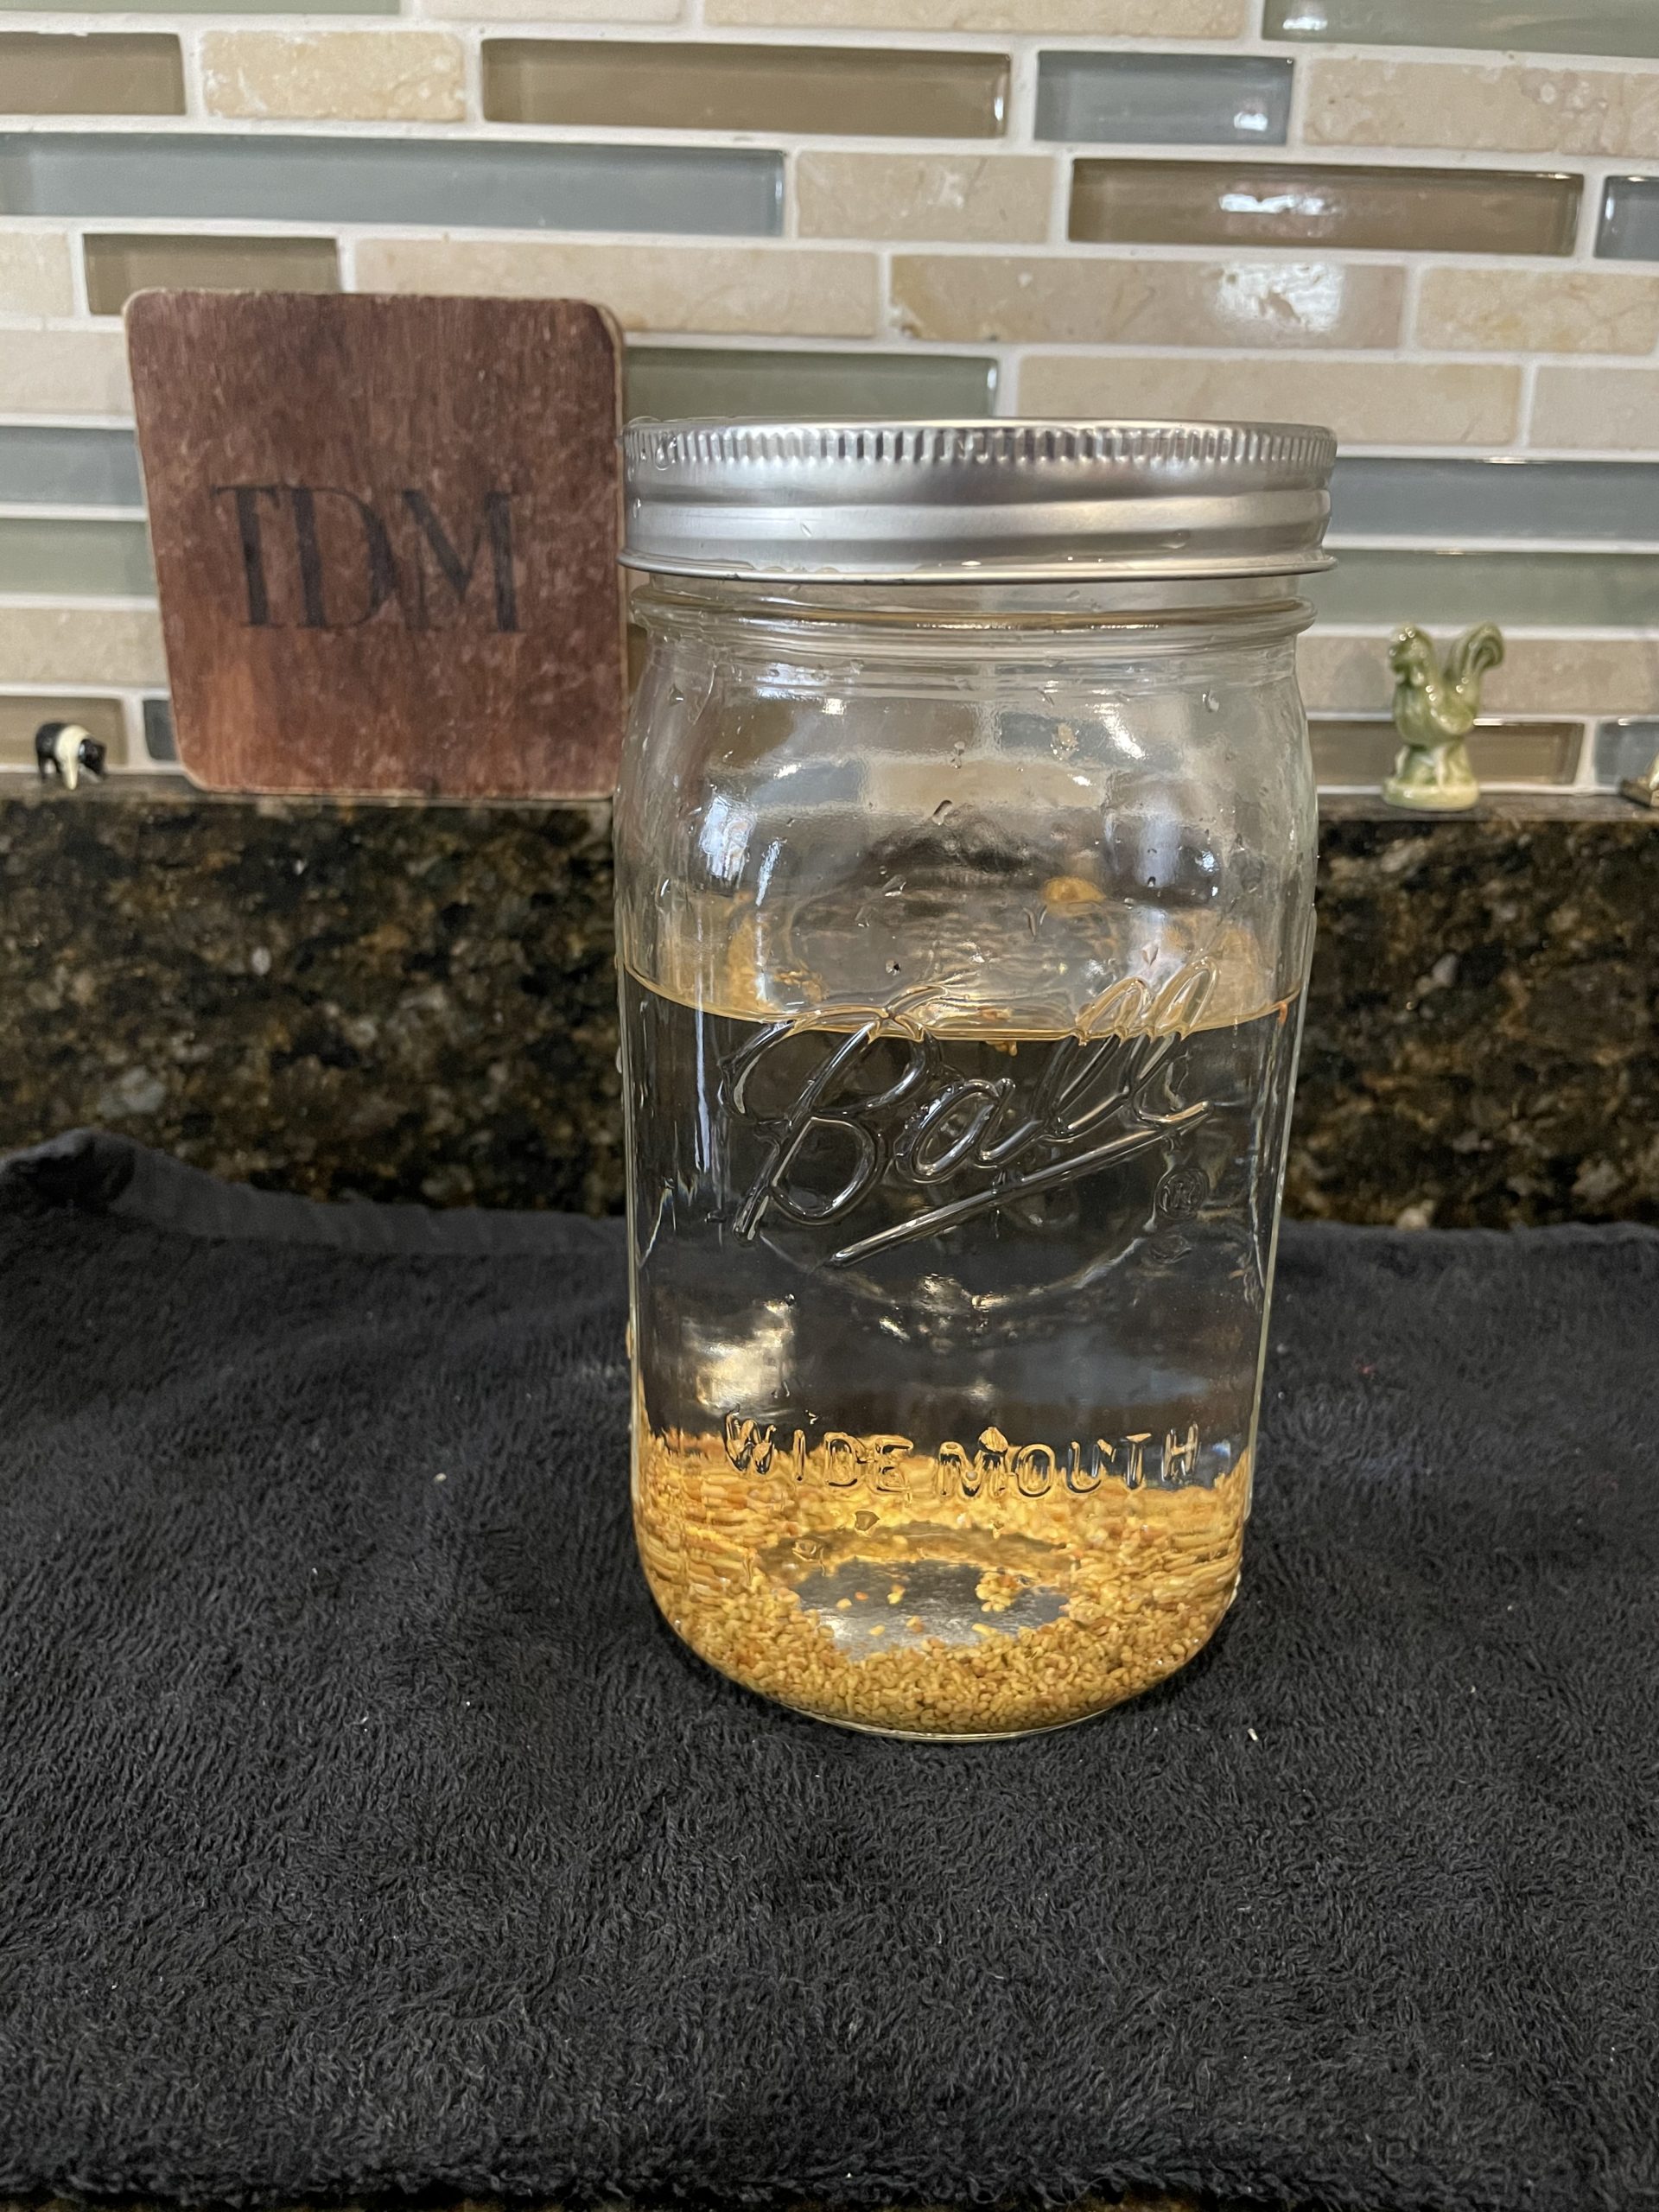 Soaking Sprouting Seeds